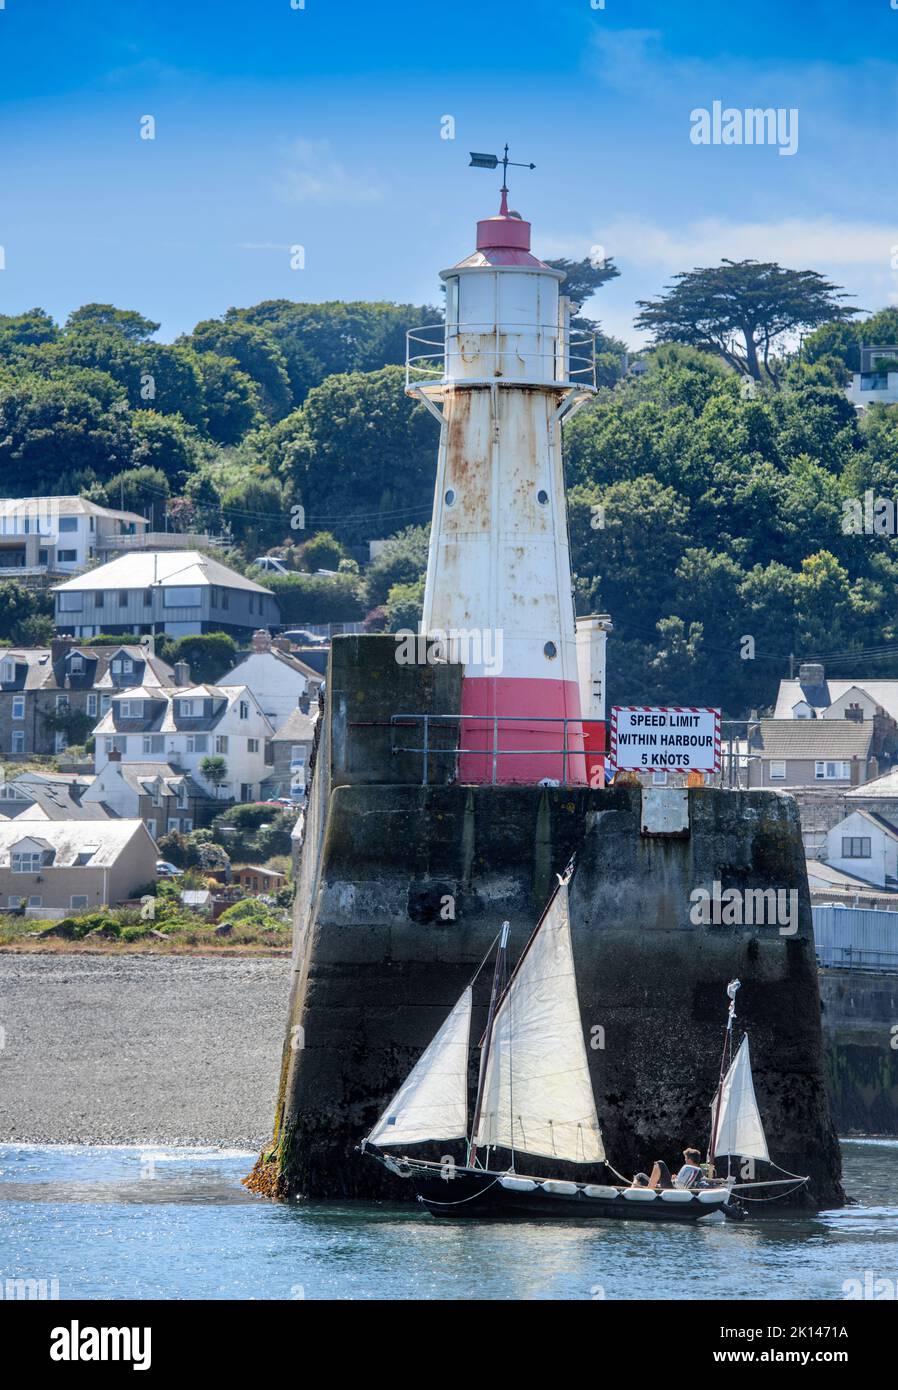 A sailing boat leaves Newlyn harbour in Cornwall, UK - the mean sea level at Newlyn, Ordnance Datum Newlyn provides the vertical datum the Ordnance Su Stock Photo